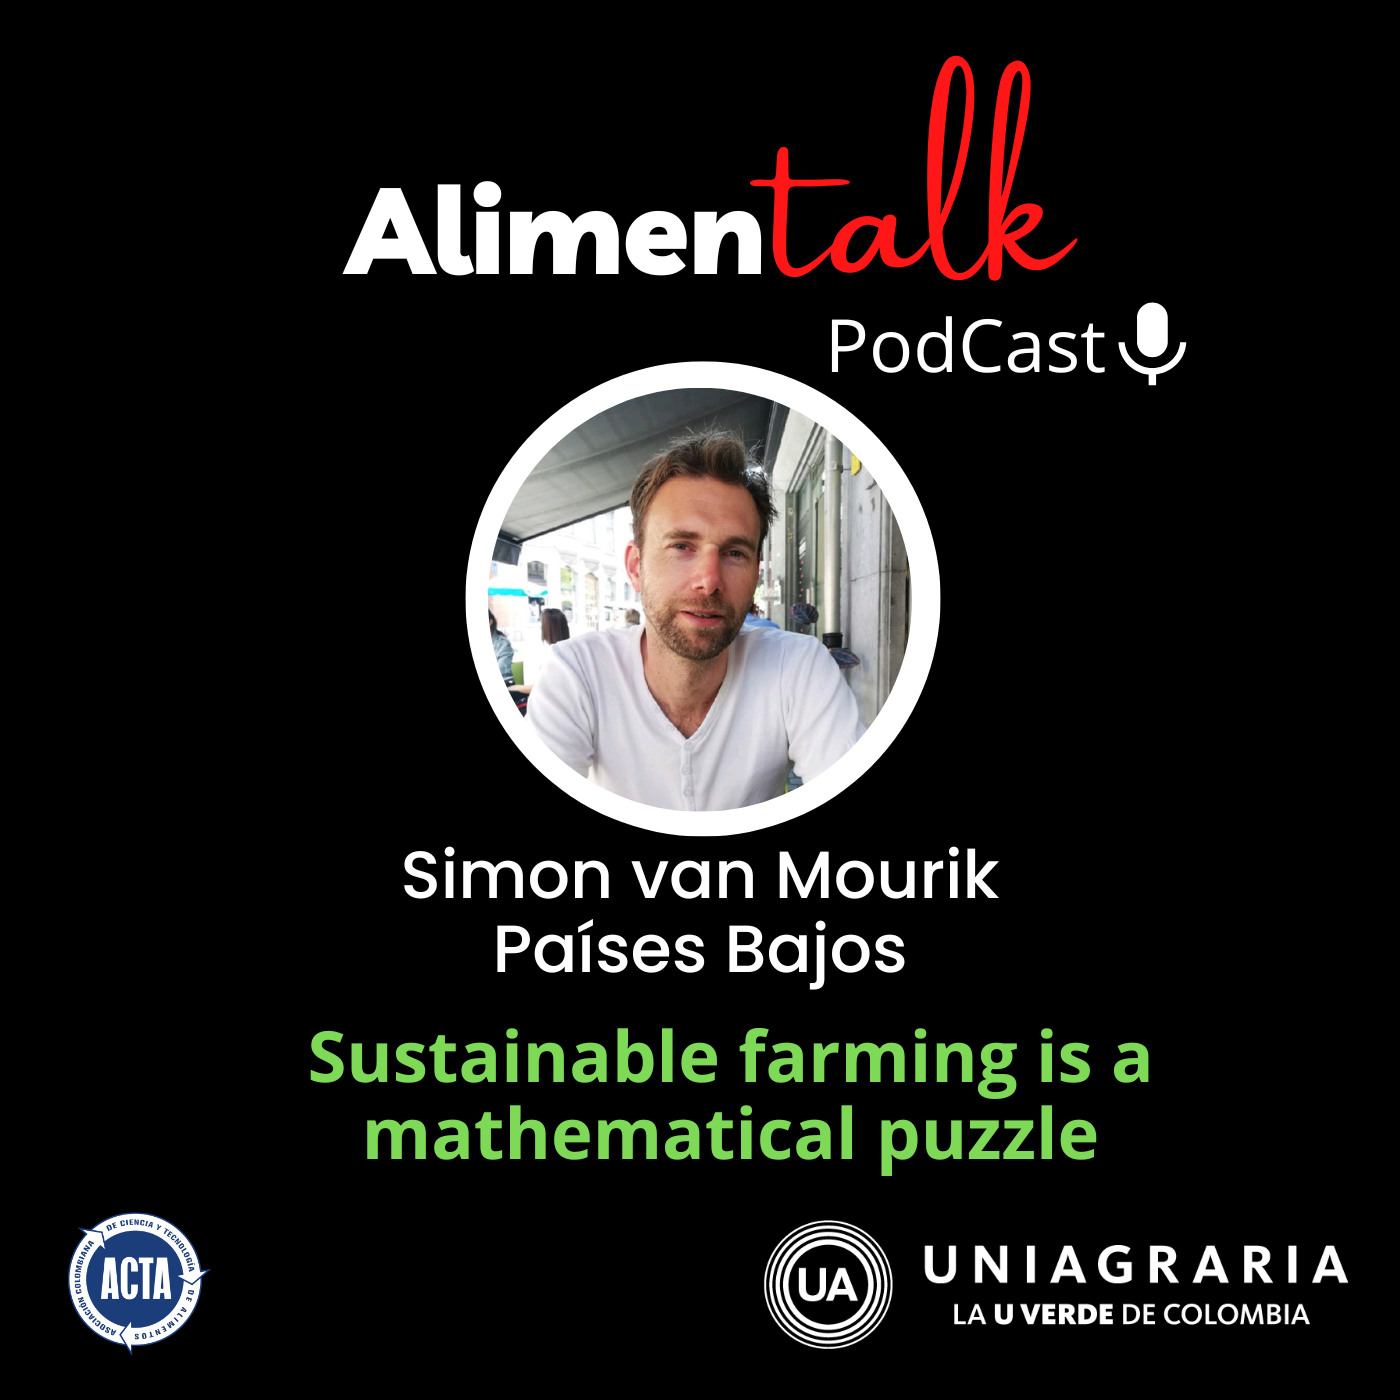 AlimenTalk podCast: Sustainable farming is a mathematical puzzle